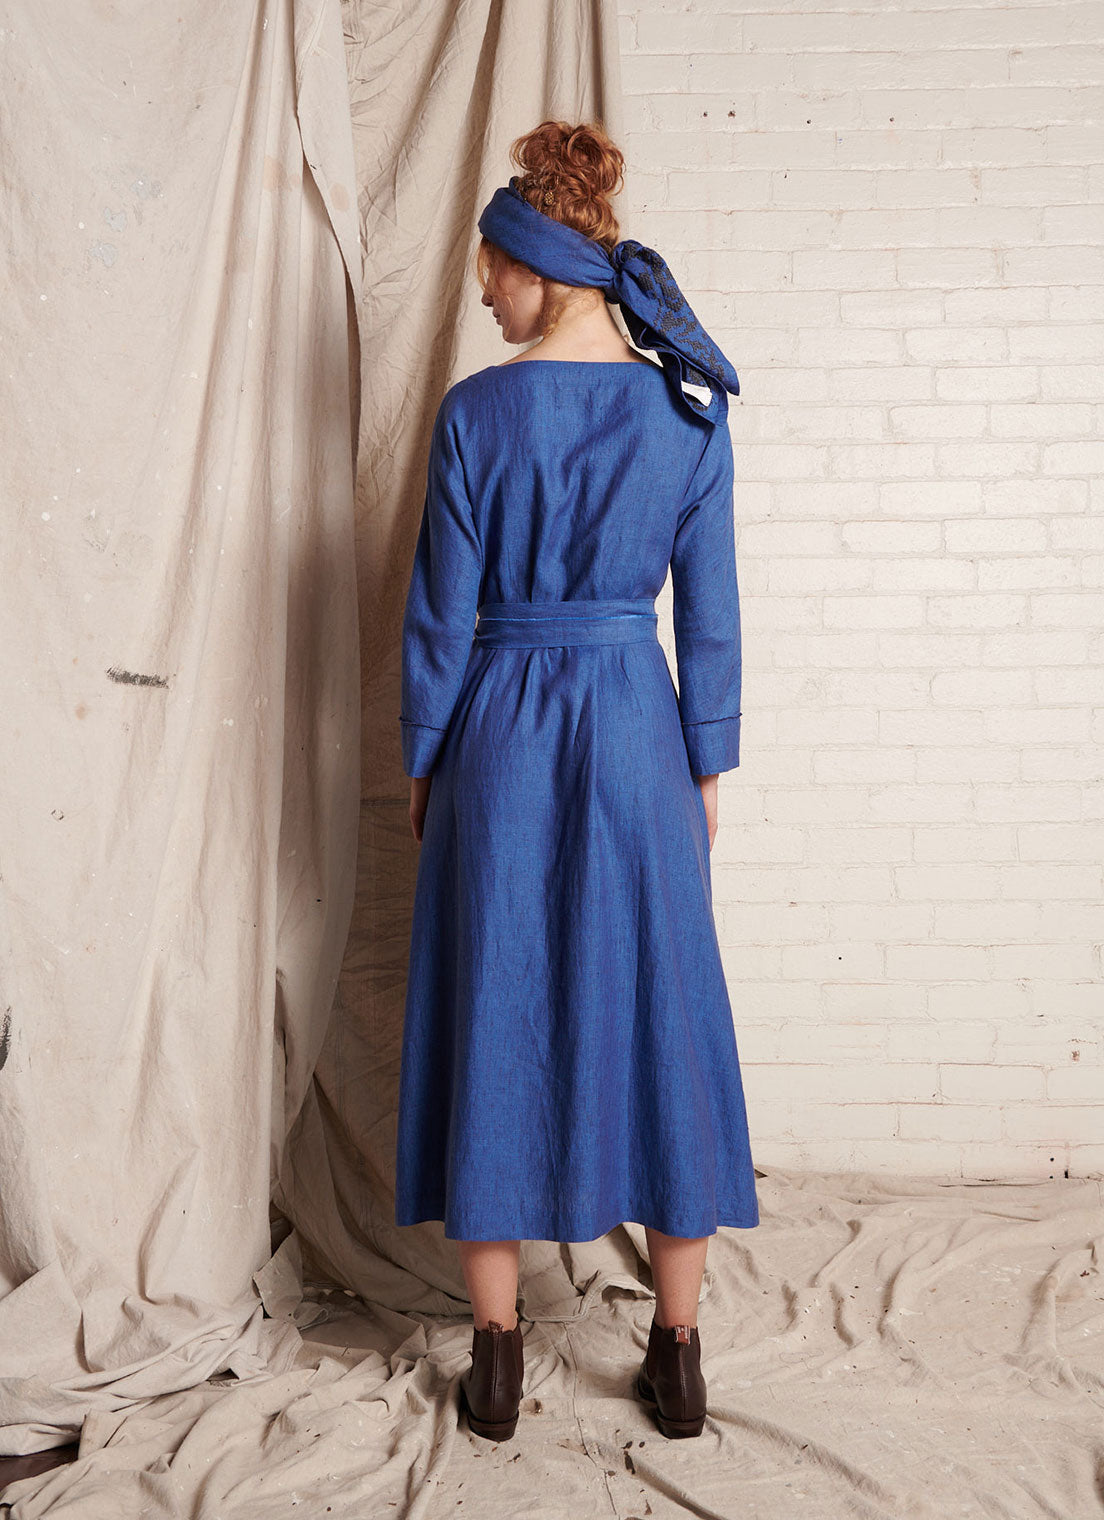 A blue, wrap, midi-length dress with open, square-cut neckline and long, cuffed sleeves with hand frayed edge finish made from European linen